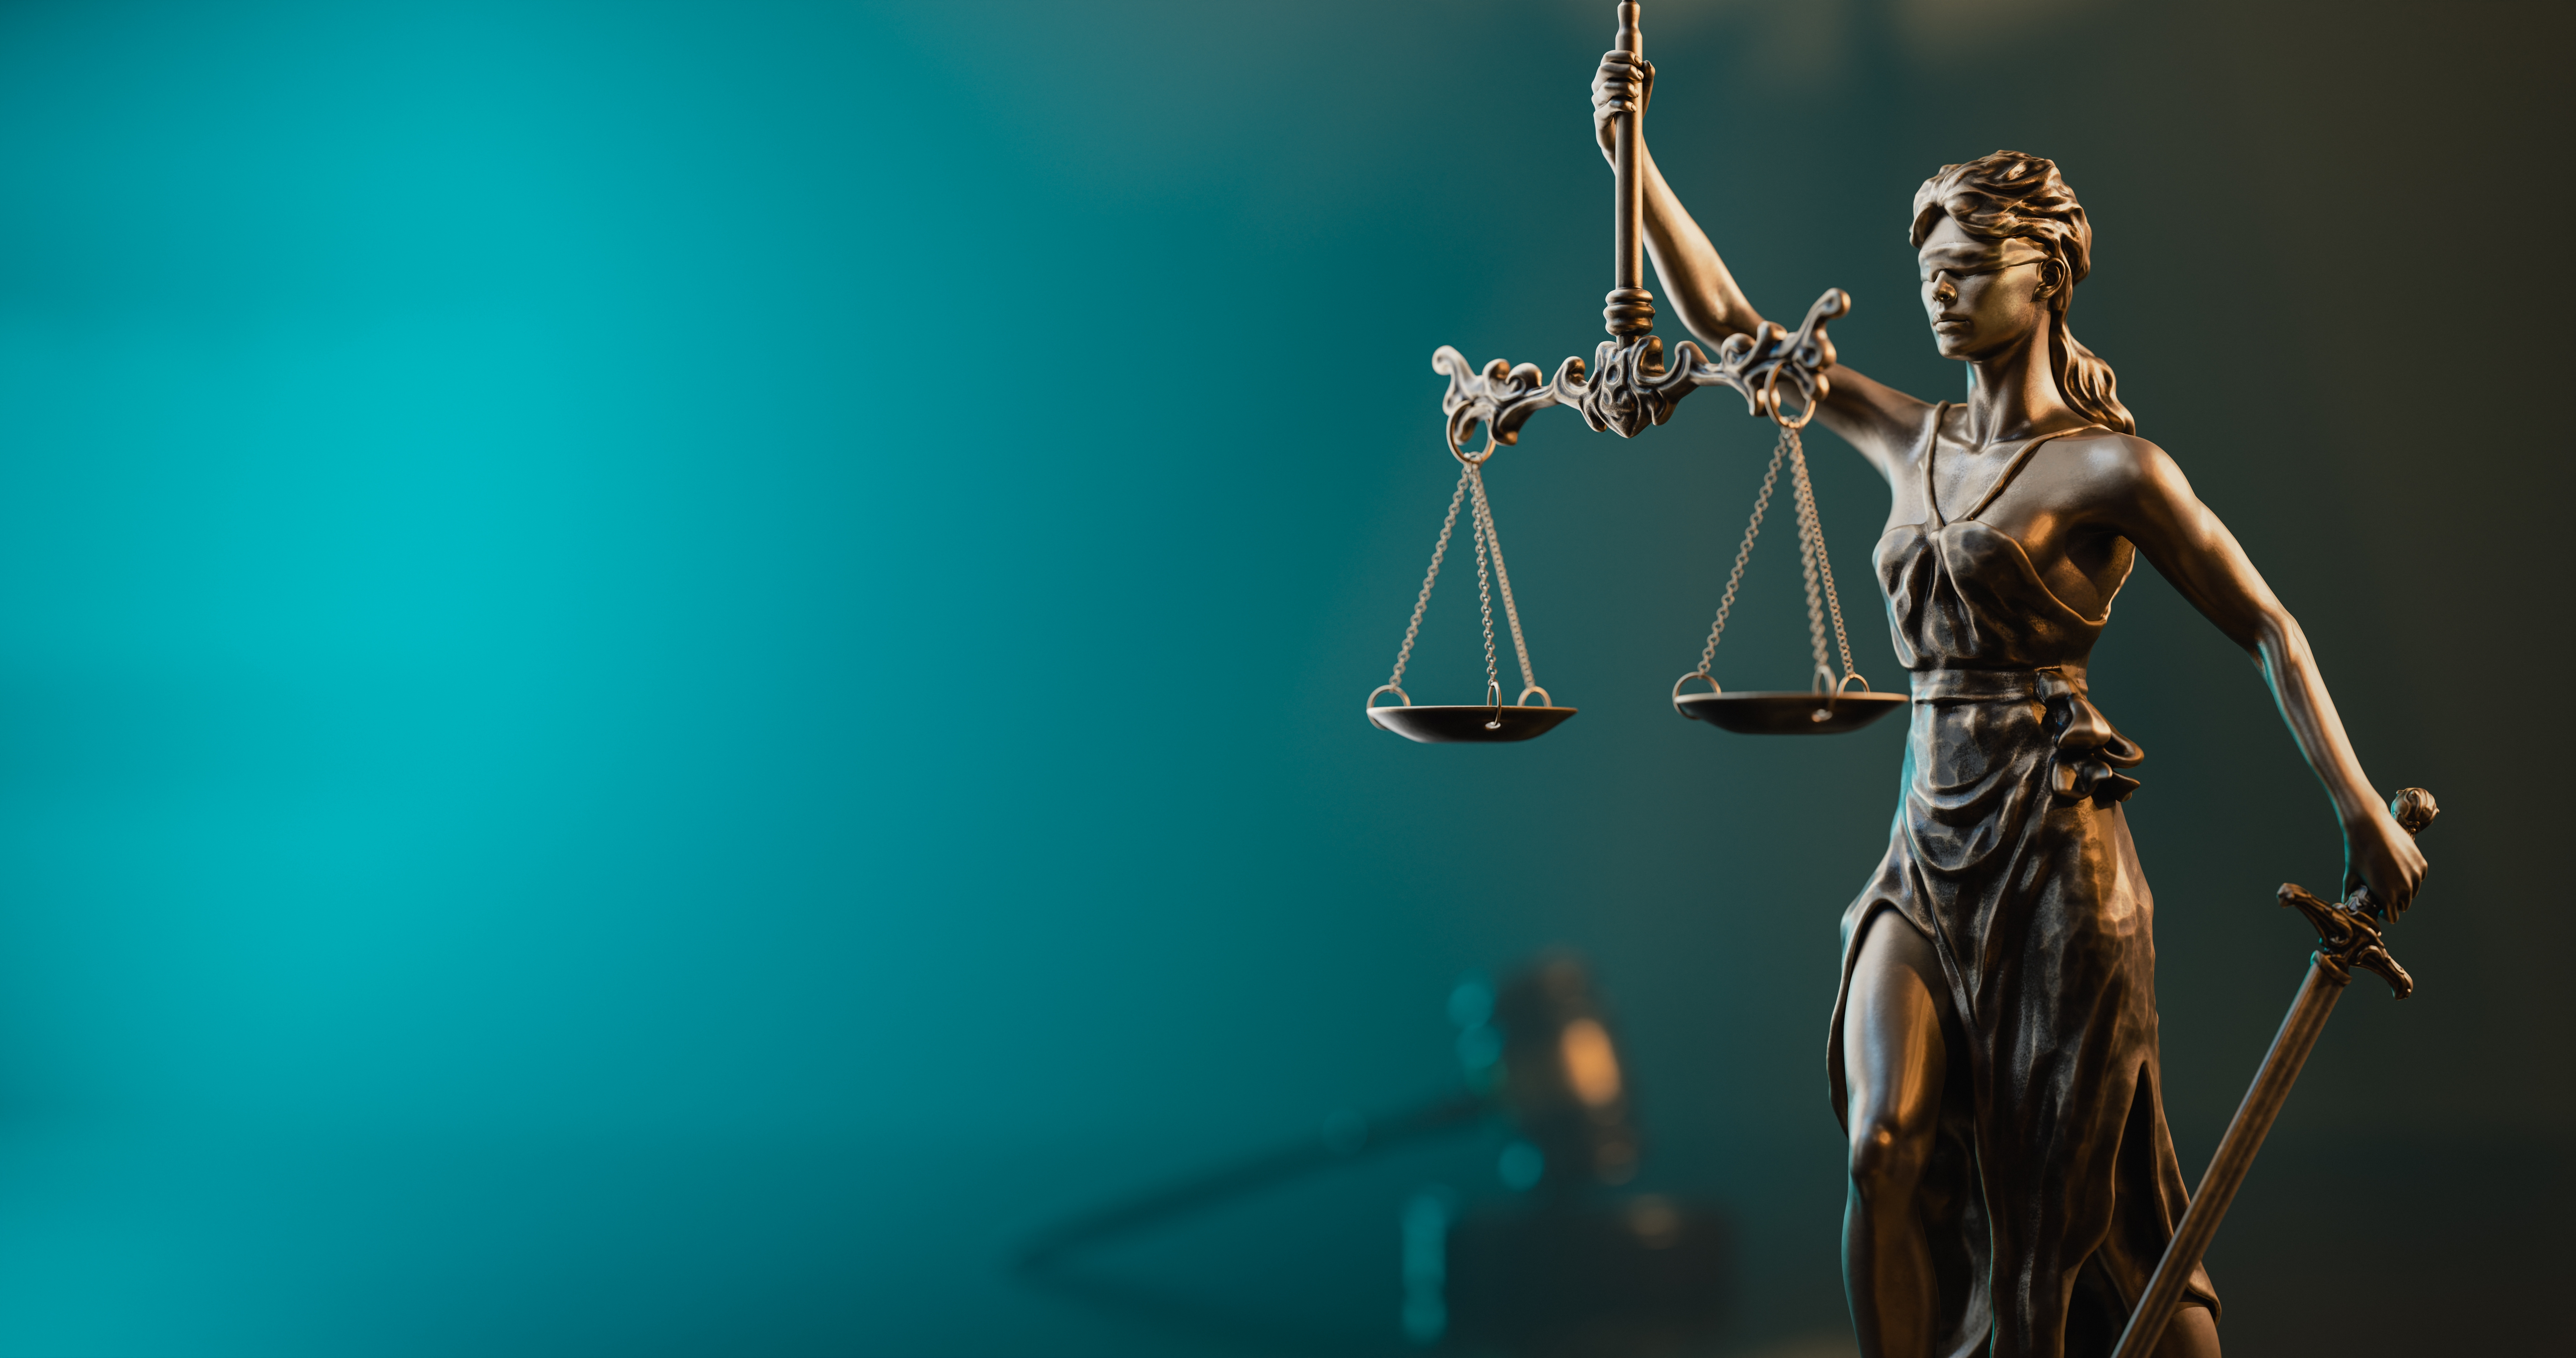 Themis, goddess of justice. External governance is required to ensure the outcomes of AI deployment are safe and just. Credit Shutterstock, Michal Bednarek